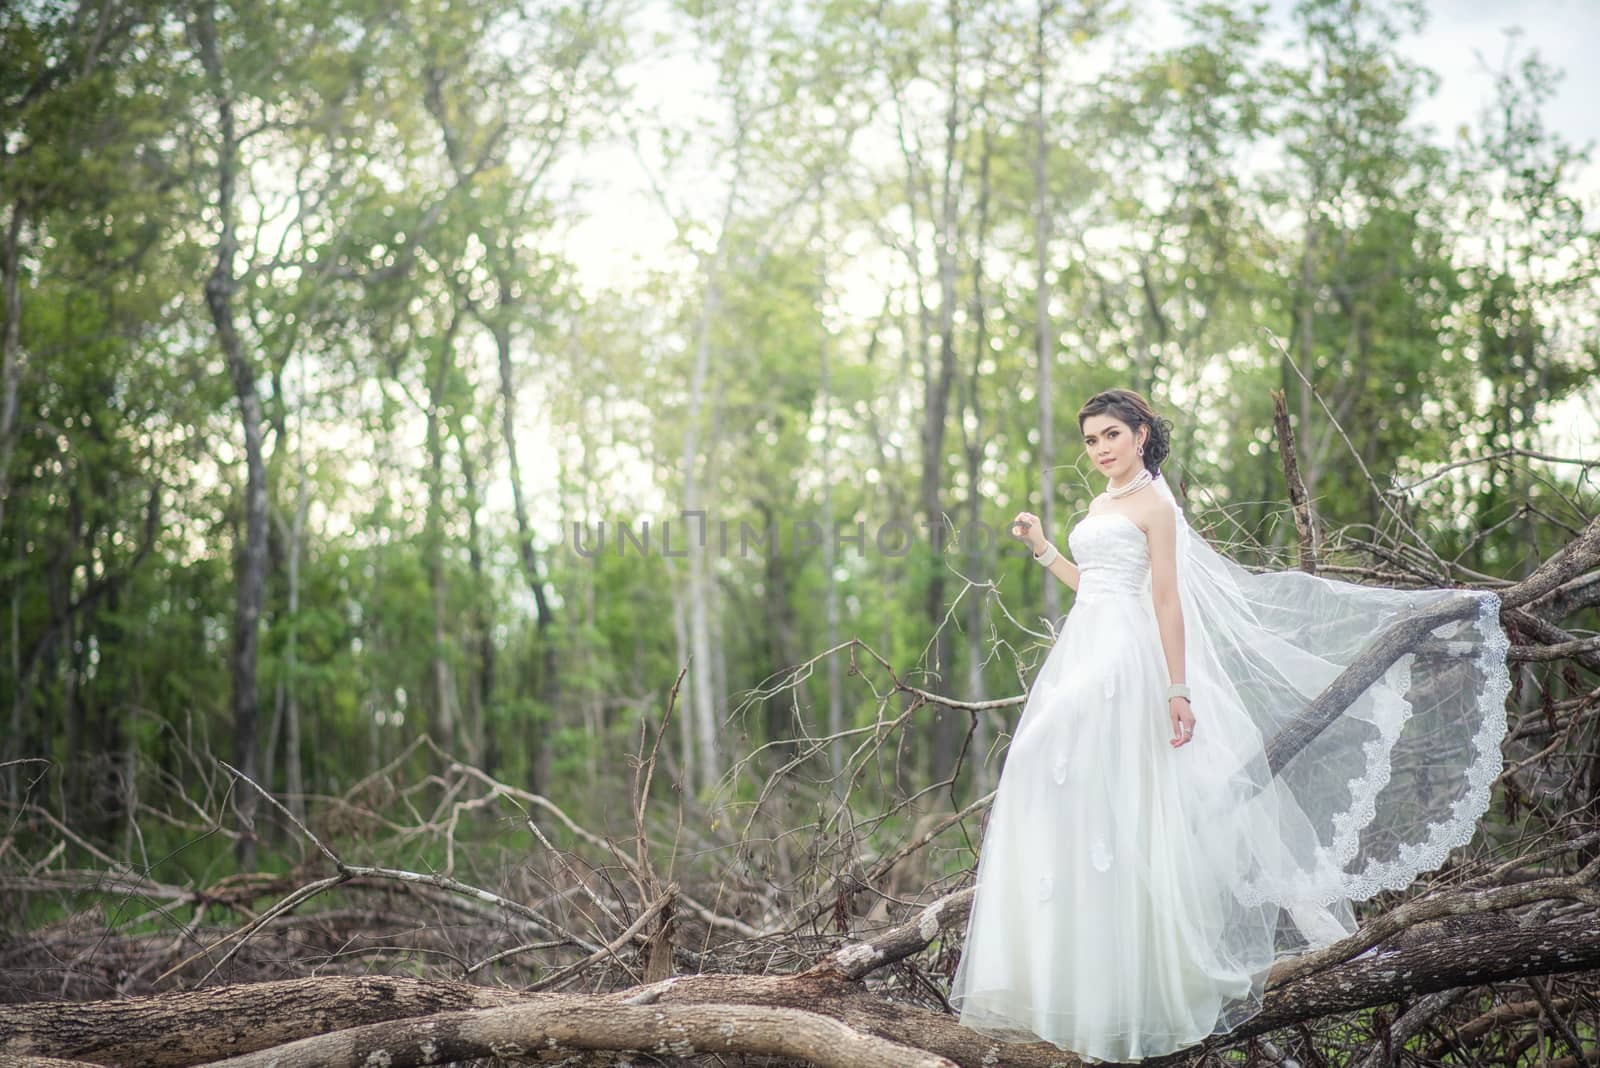 Beautiful girl in the dress of the bride walks in autumn park with trees and fallen leaves